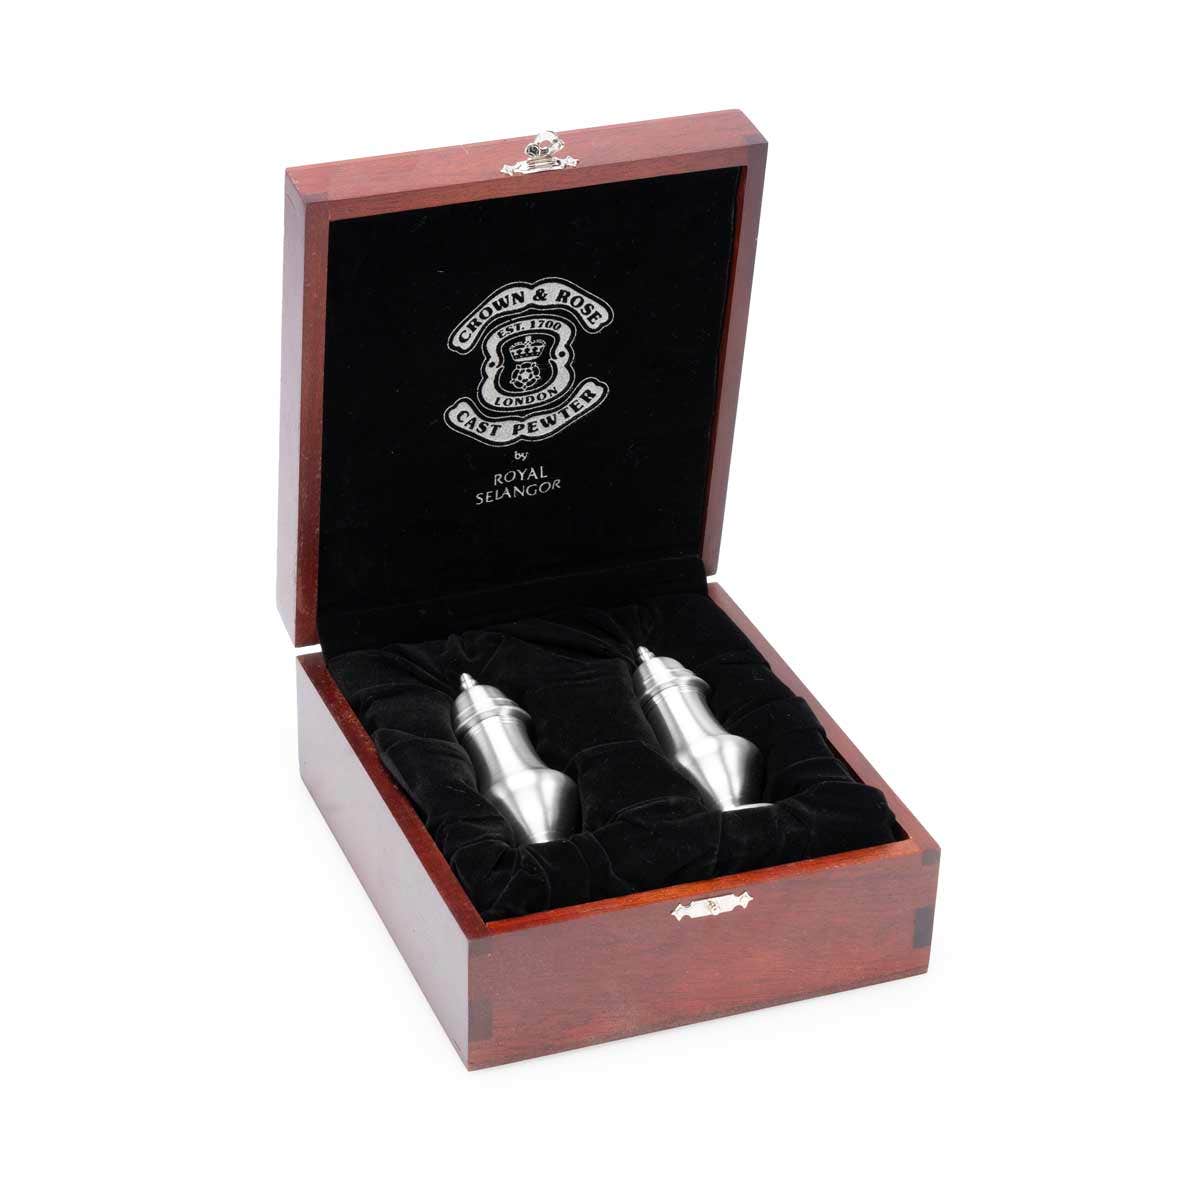 Royal Selangor Salt and Pepper Shakers with Gift Box - Pewter - Notbrand